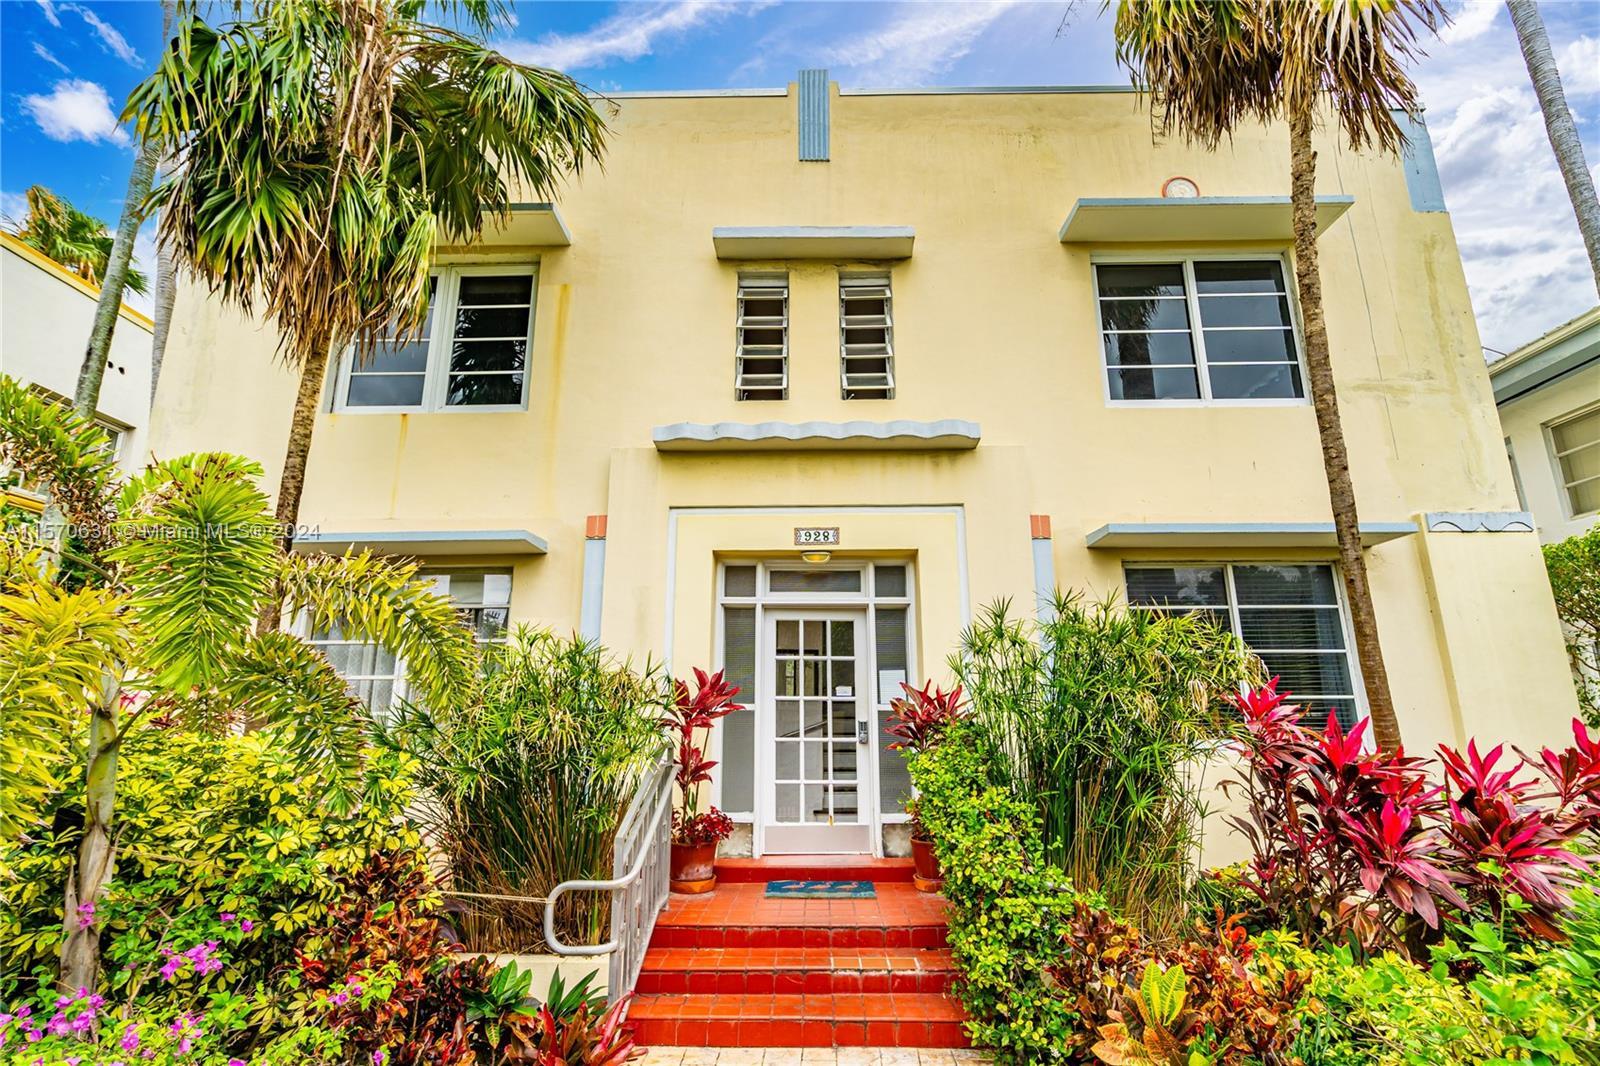 Enjoy South Beach living at its finest! This two story home has a private foyer entry and stairway i